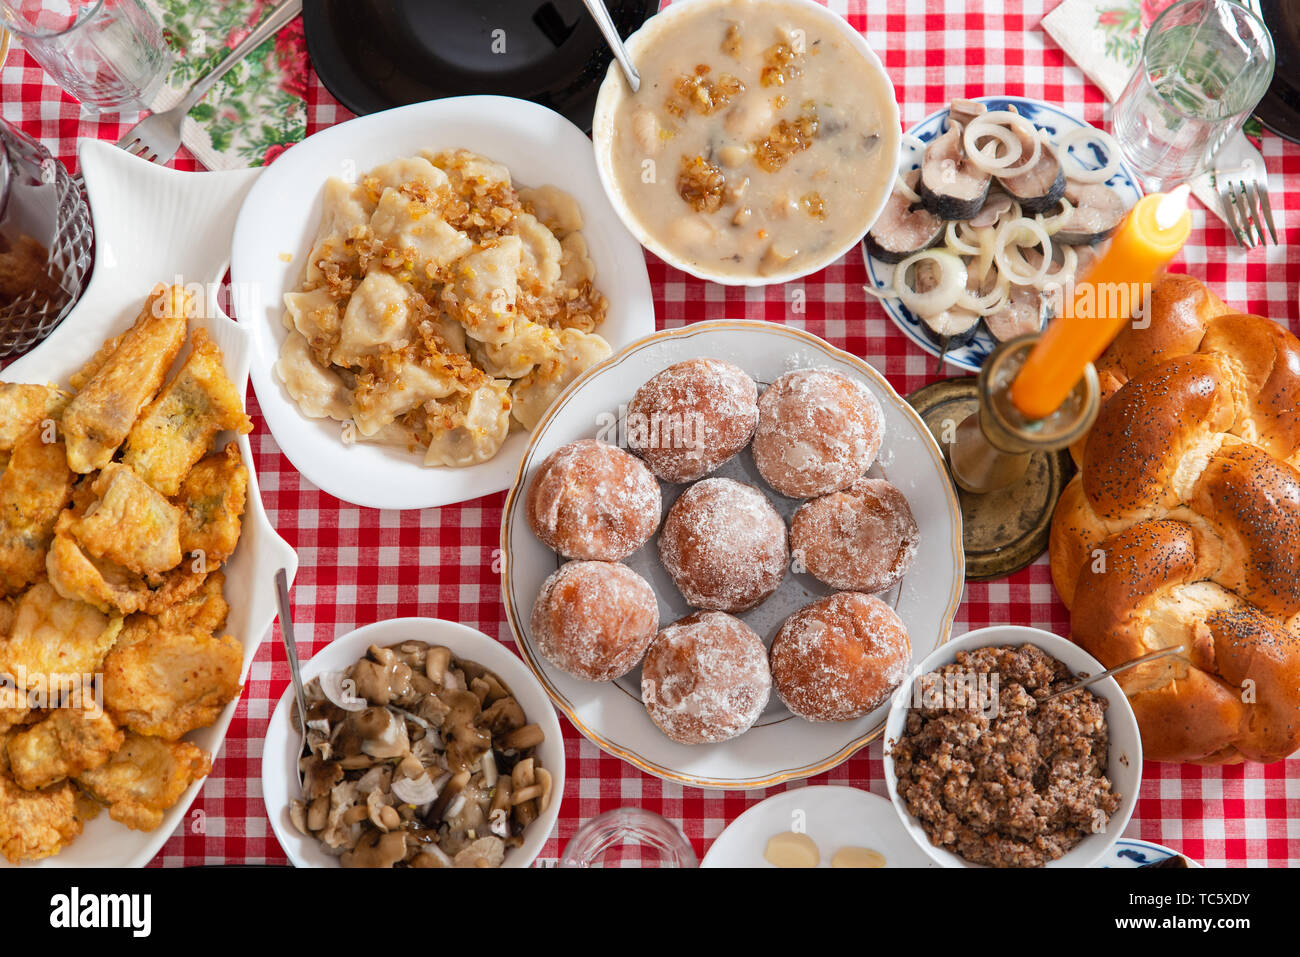 Traditional Christmas table in Ukraine. Twelve dishes: kutya, stewed fruit, dumplings with potatoes and cabbage, pickled mushrooms, donuts, garlic. Stock Photo